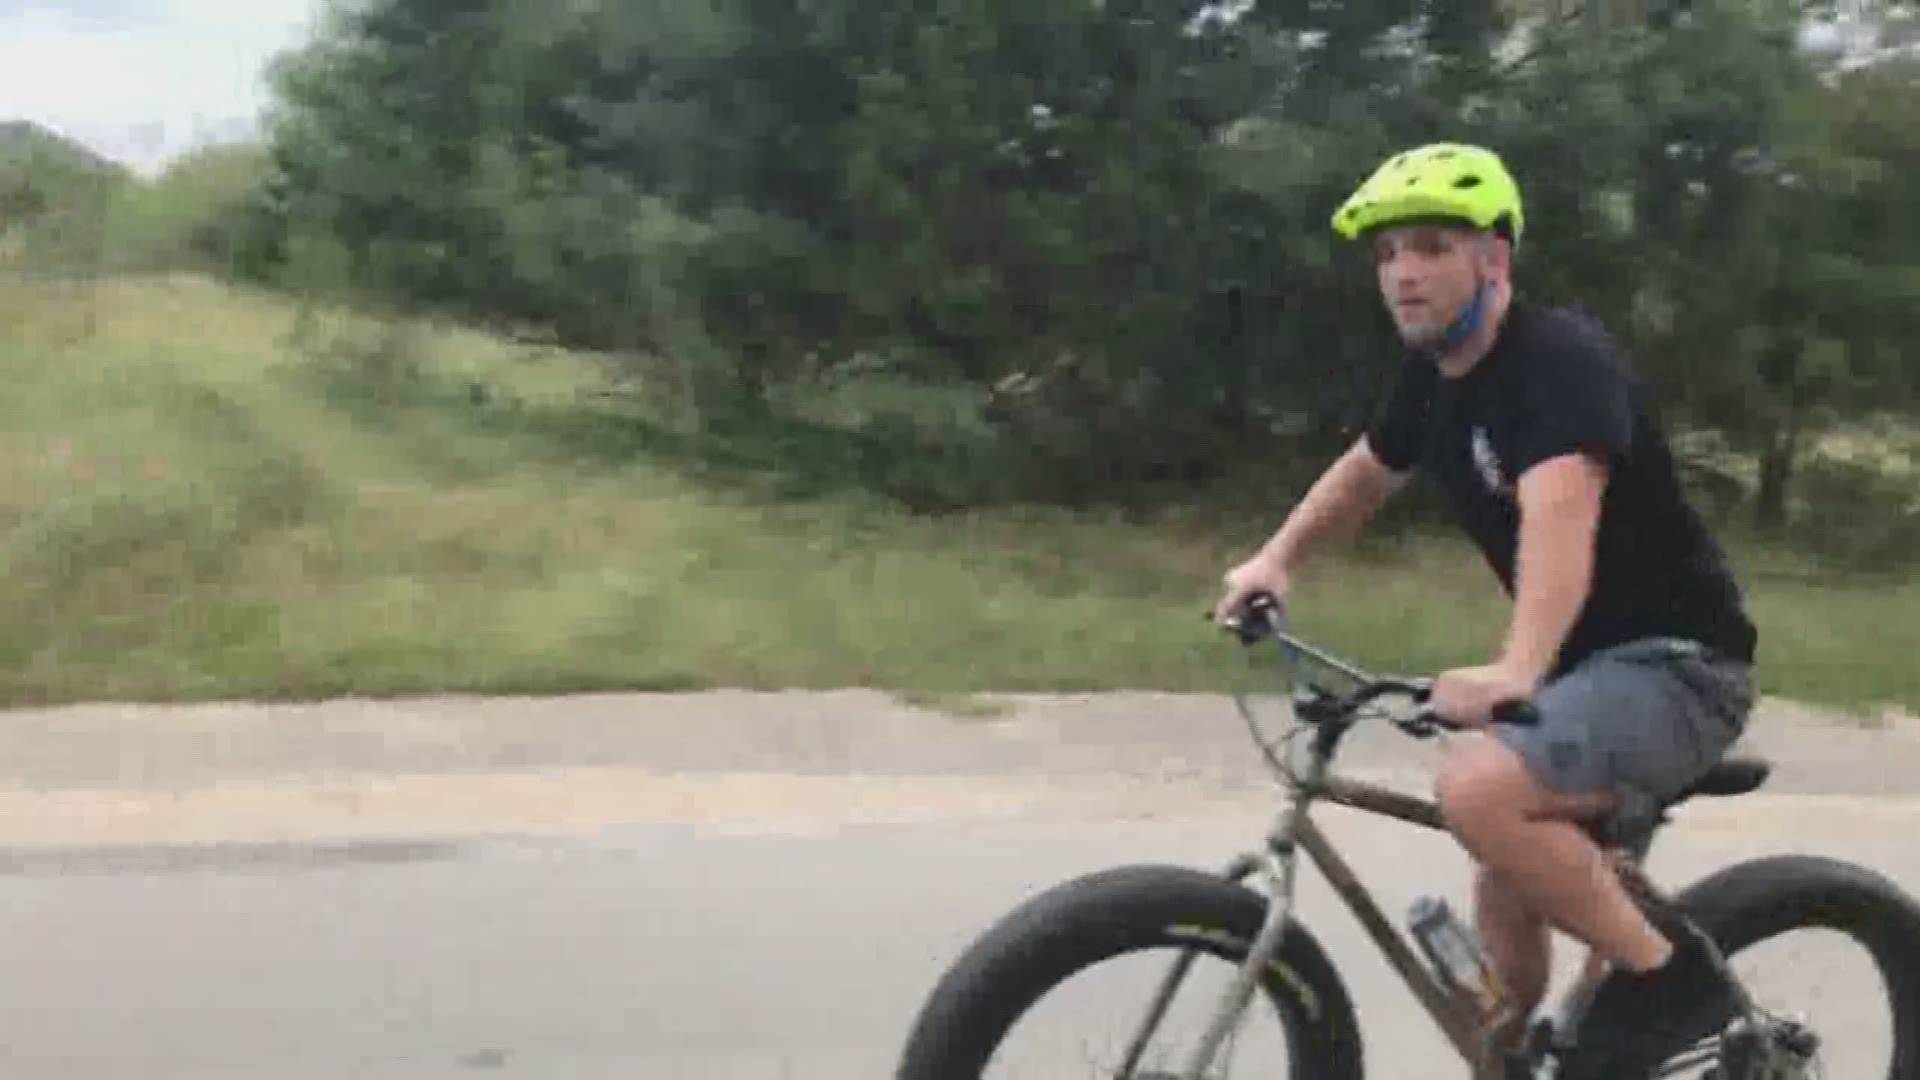 A Marine Corps veteran is offering two-wheel therapy on the trails of San Antonio. Eyewitness News reporter Sharon Ko has more.